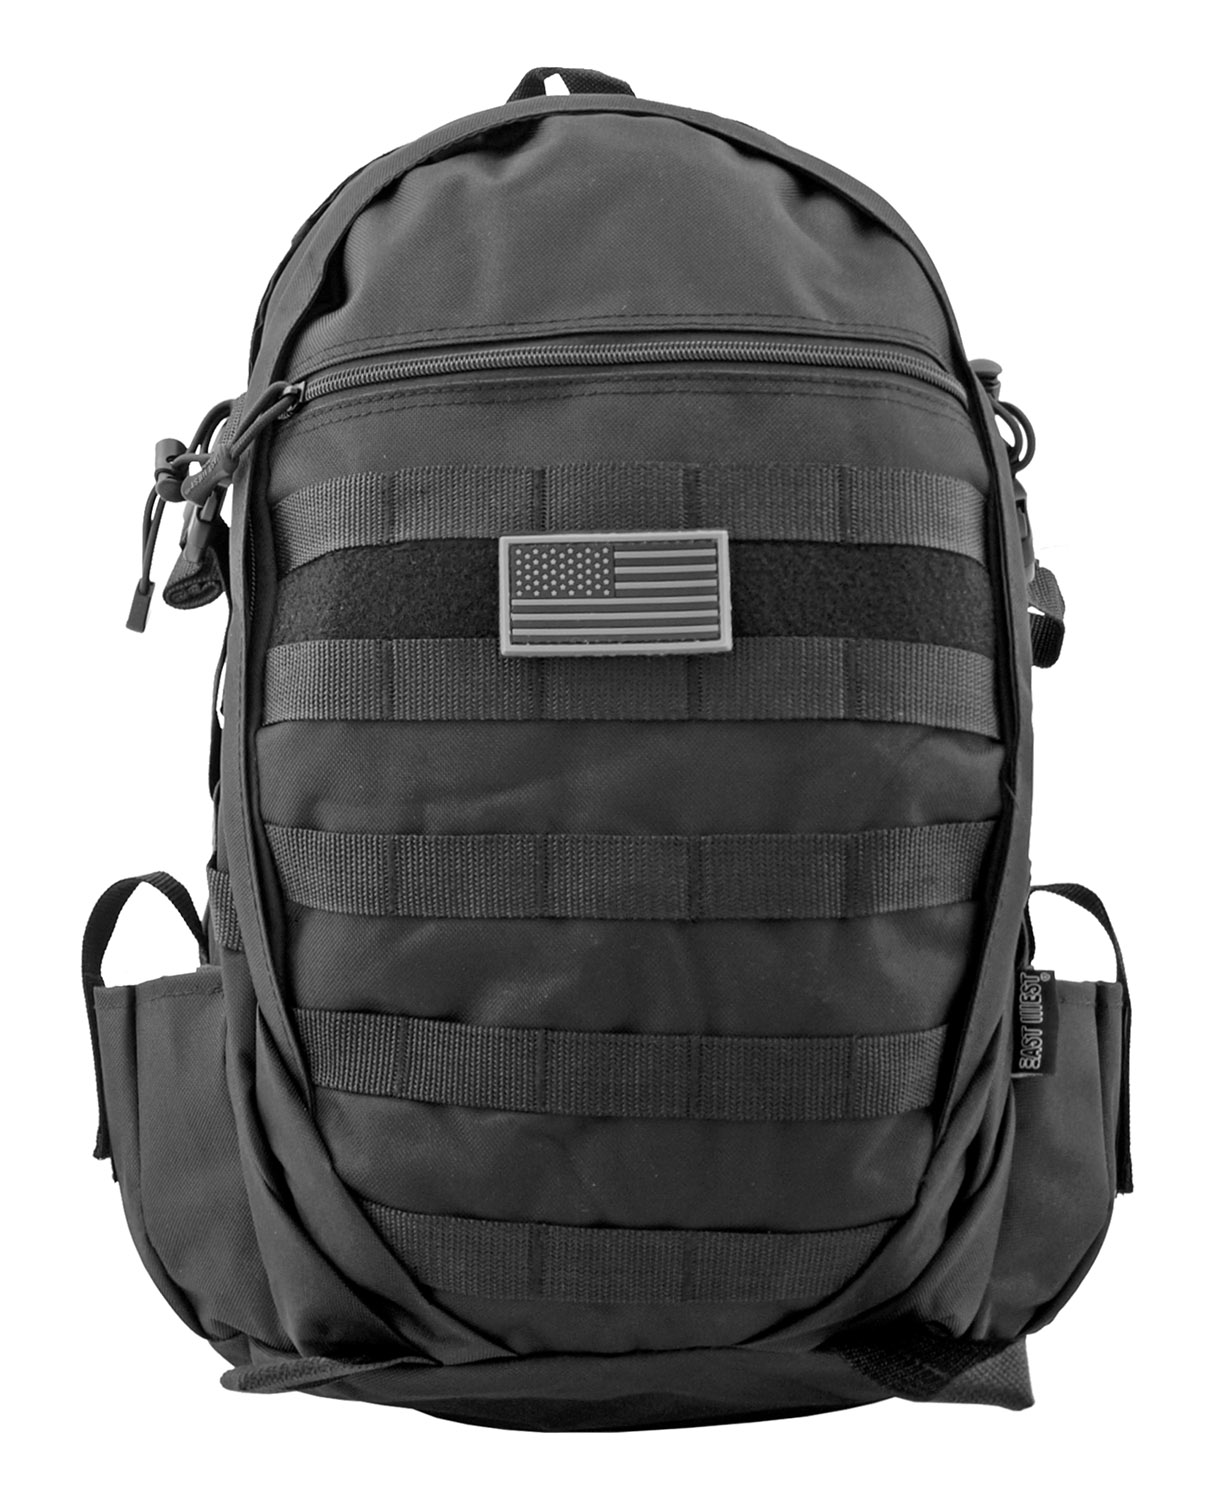 The Runner Tactical Bug Out Backpack - Black